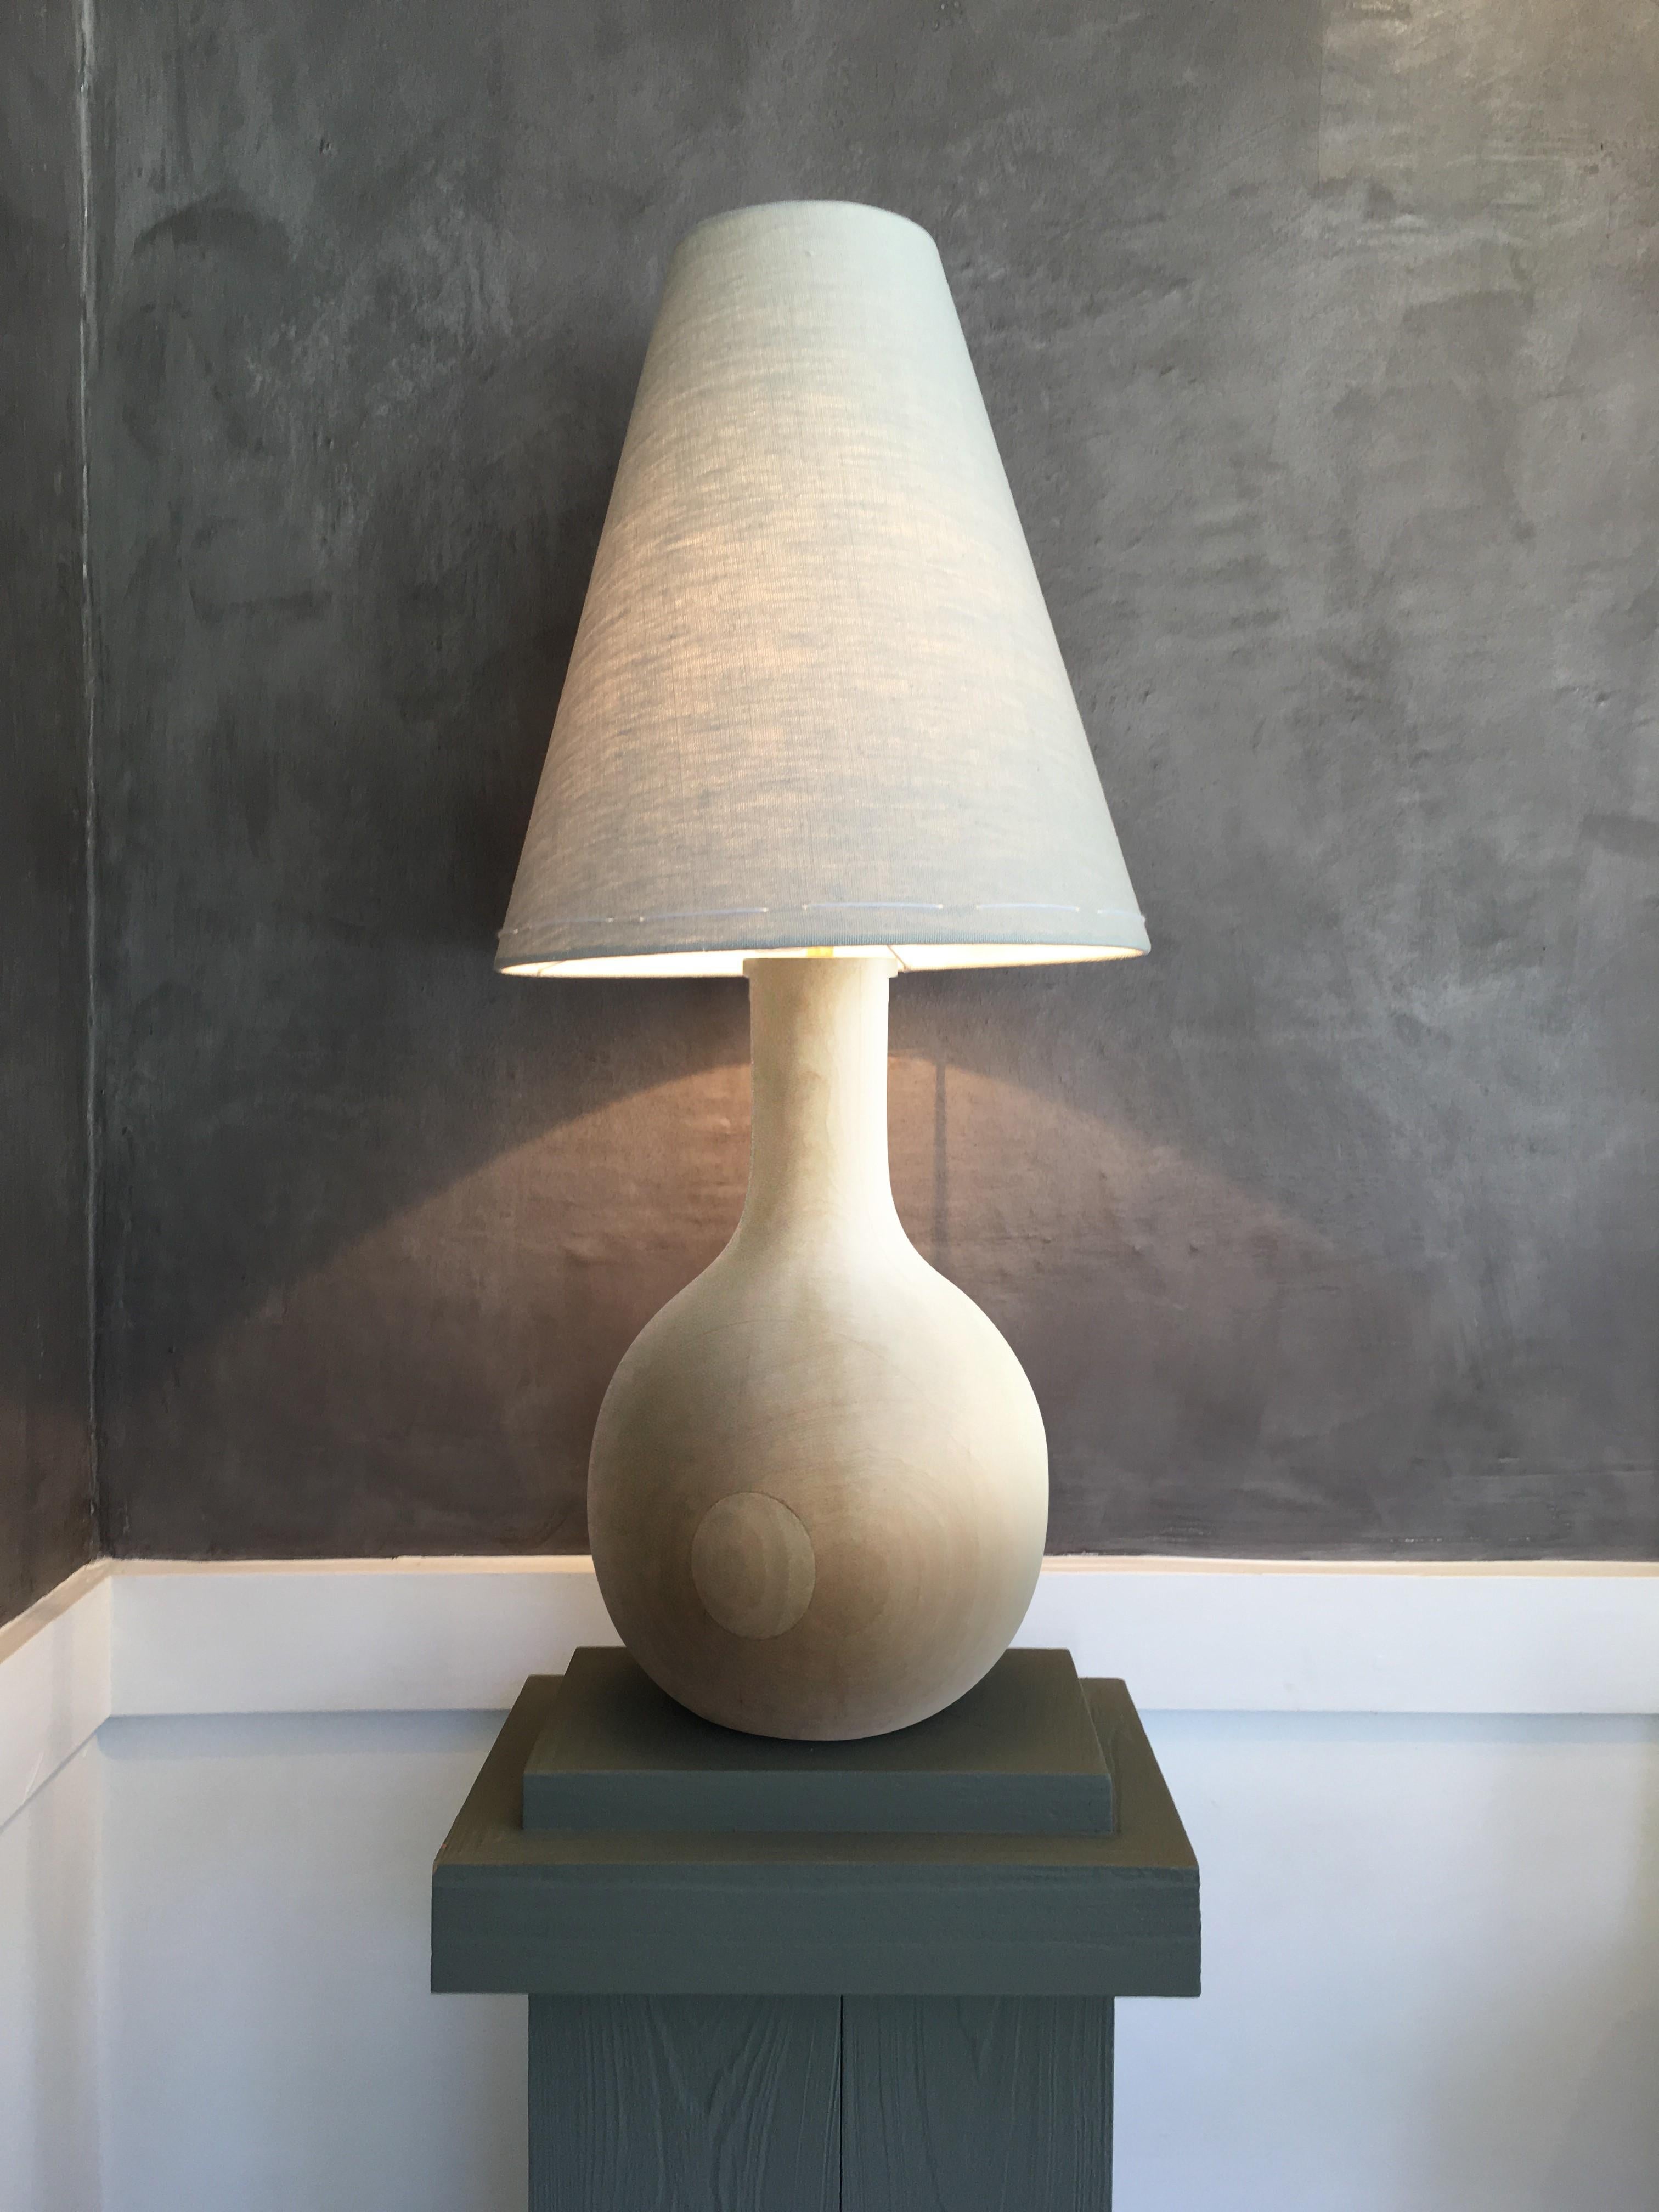 This sculptural, artisanal table lamp is a timeless example of 21st century organic modern design. Its tactile shape exudes quiet meditative Wabi Sabi modesty. Designed by Wende Reid and made on a single lathe in Australia by Wende Reid Studio, Yin